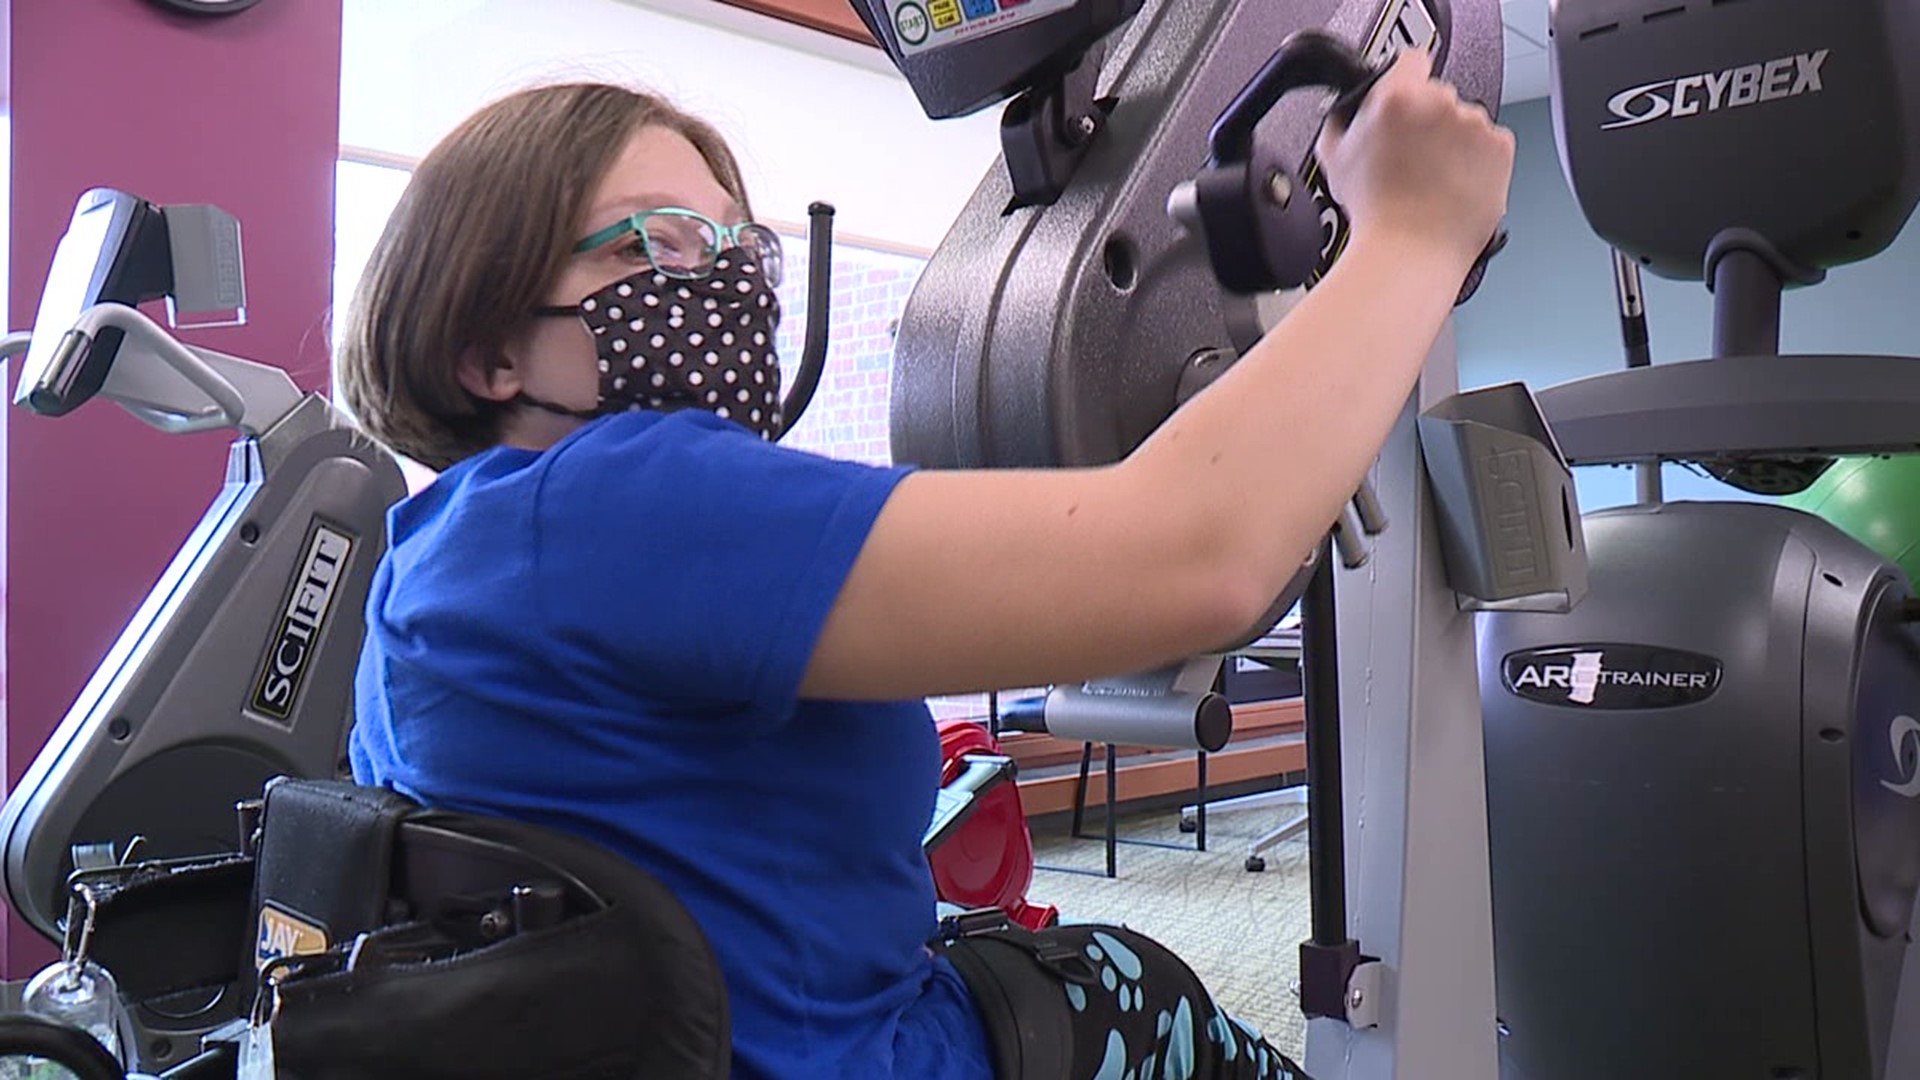 Team Allied Service's 5K & All Abilities Walk is taking place this weekend. Newswatch 16's Elizabeth Worthington introduces us to one of the participants.